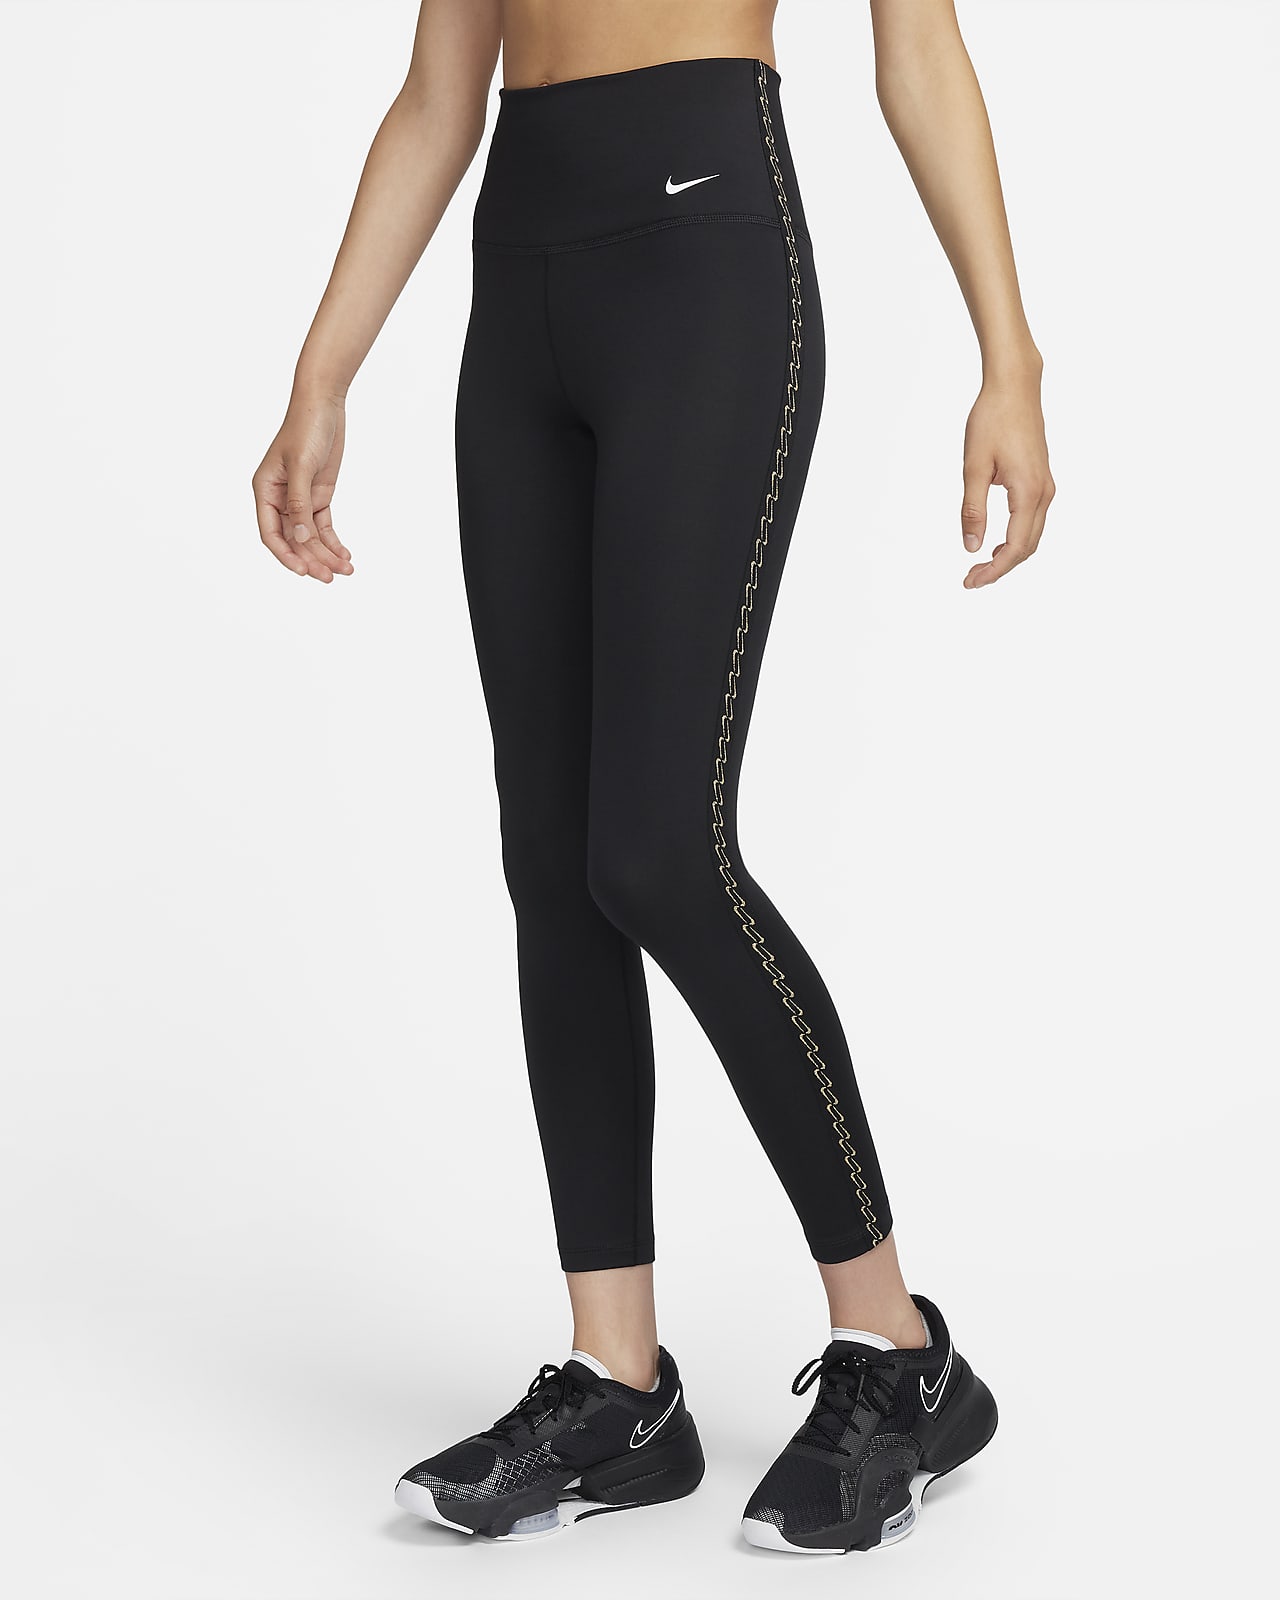 Legging 7/8 taille haute Therma-FIT Nike One pour femme